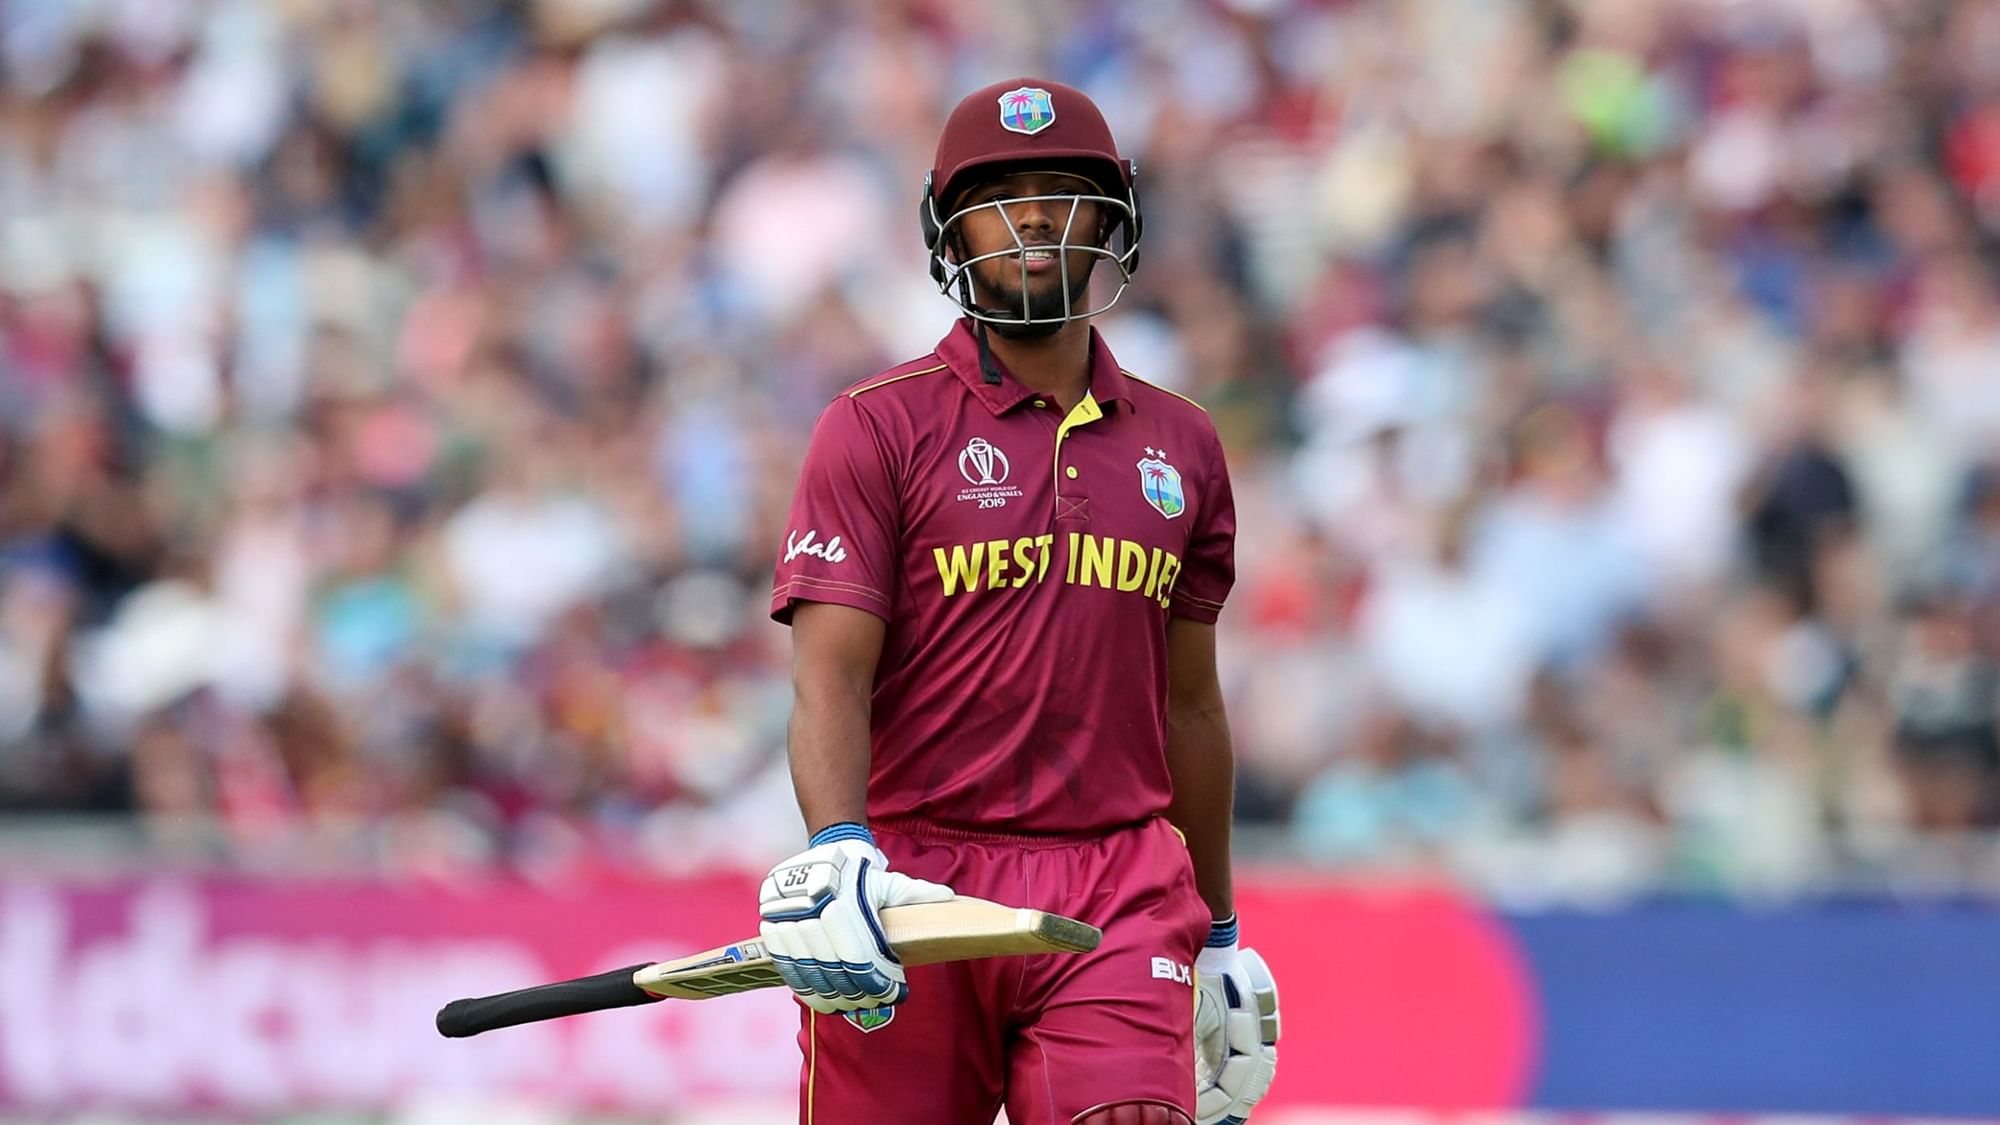 West Indies’ Nicholas Pooran leaves the field after being dismissed during the Cricket World Cup match between West Indies and Sri Lanka in Riverside Ground,Chester-le-Street.&nbsp;